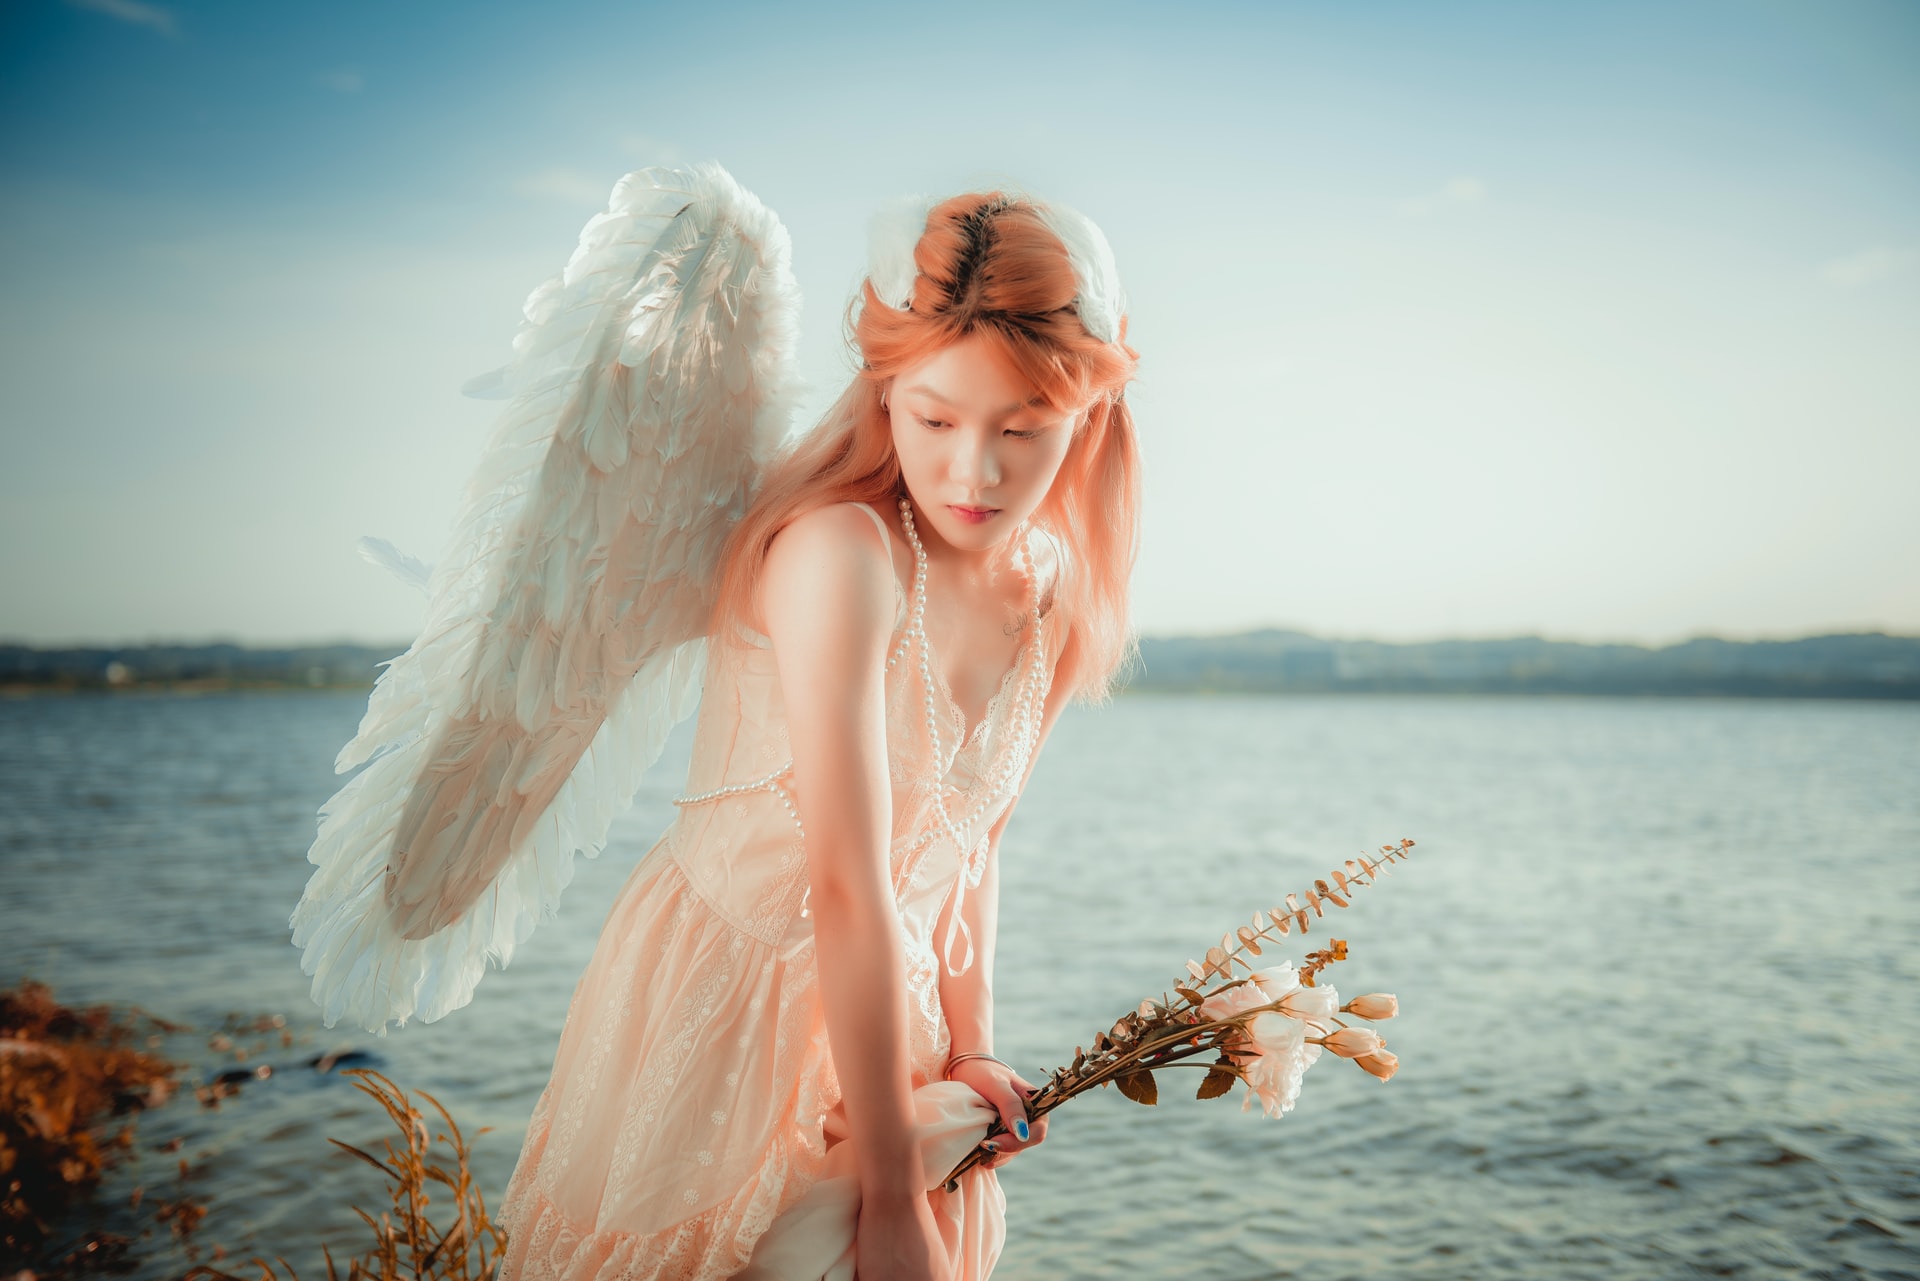 Girl Standing at River Bank With Angelic Wings